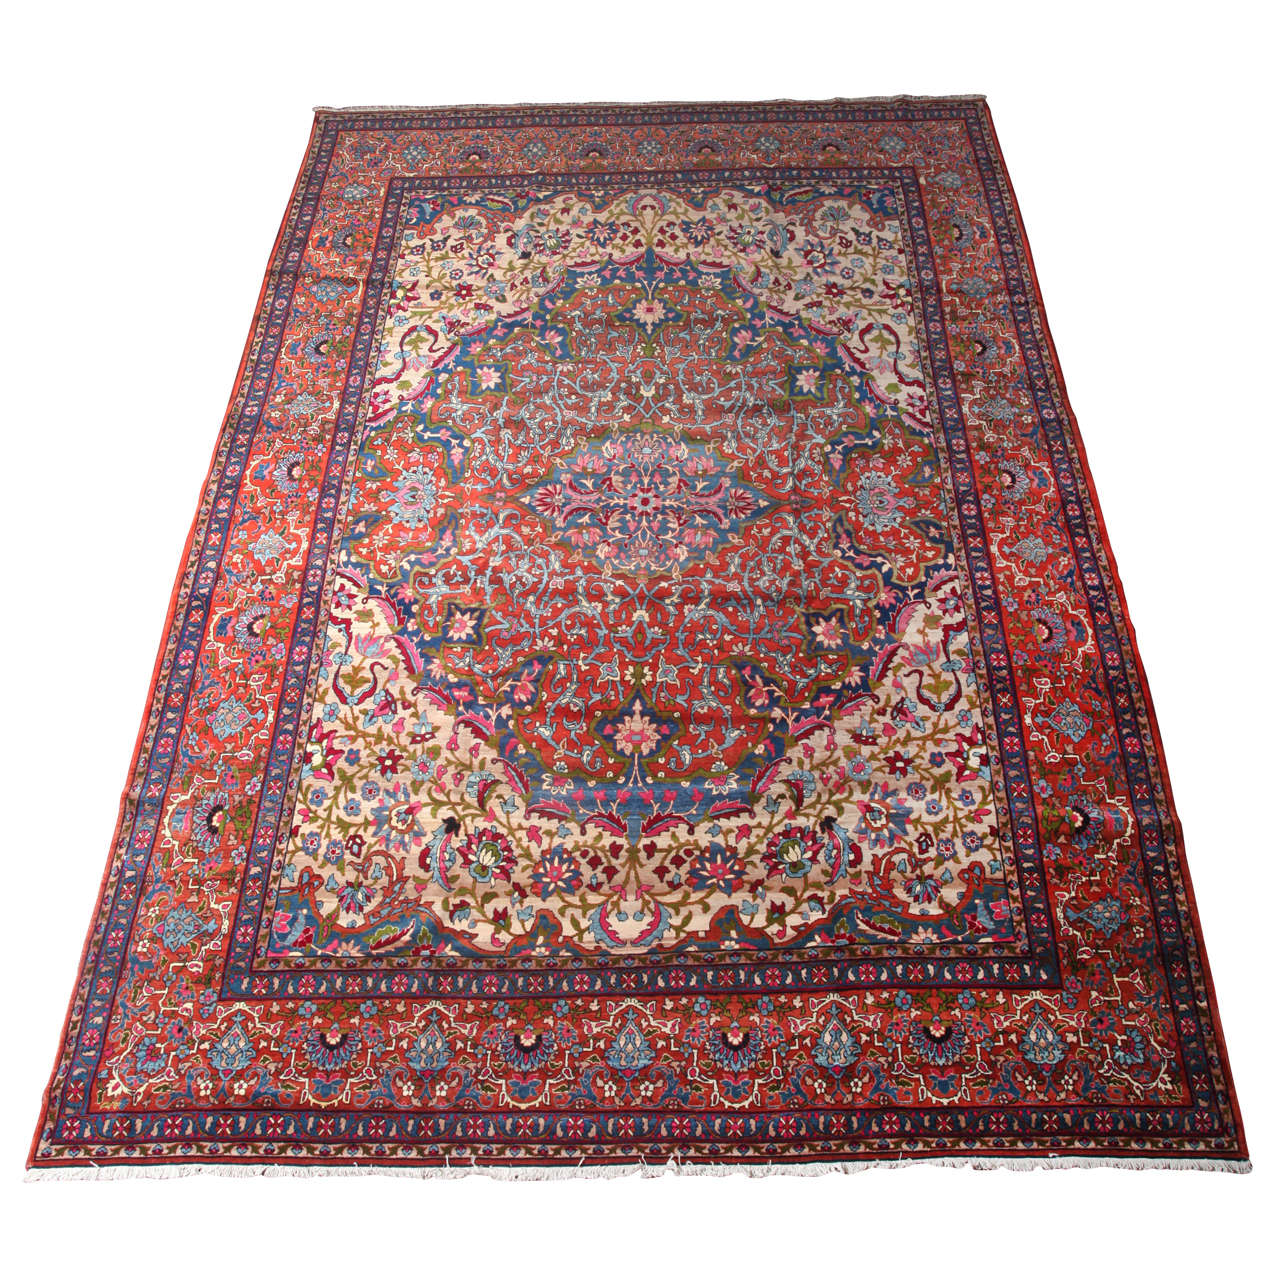 Antique 1880s Persian Kermanshah Rug with Safavid Dynasty Design, 11' x 15' For Sale